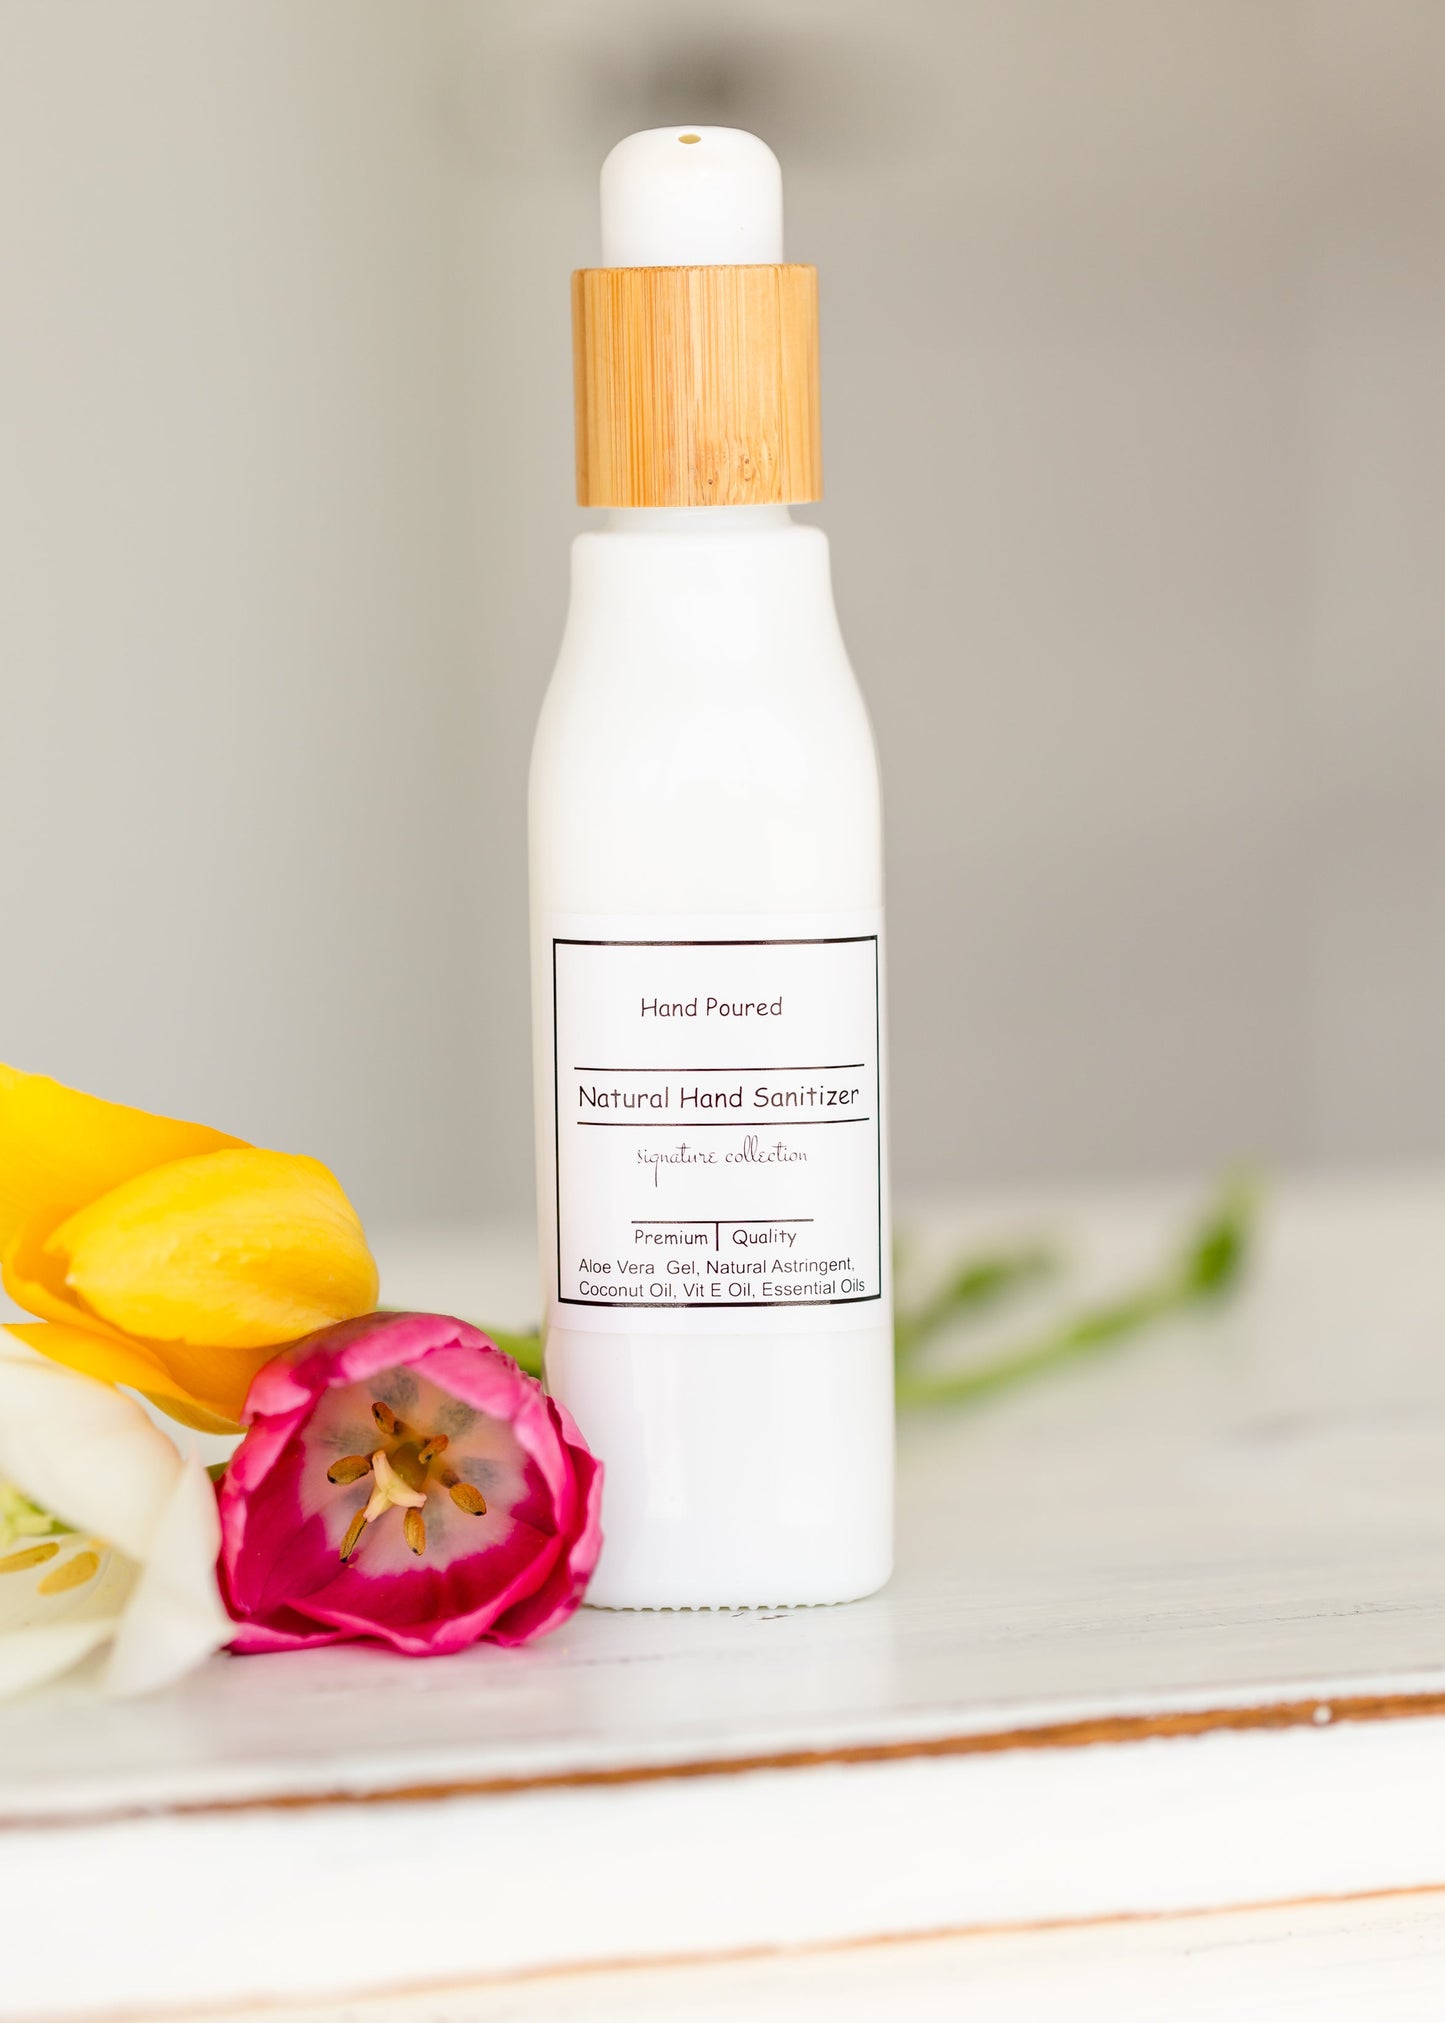 Hand Poured White Bottle Natural Hand Sanitizer Home & Lifestyle